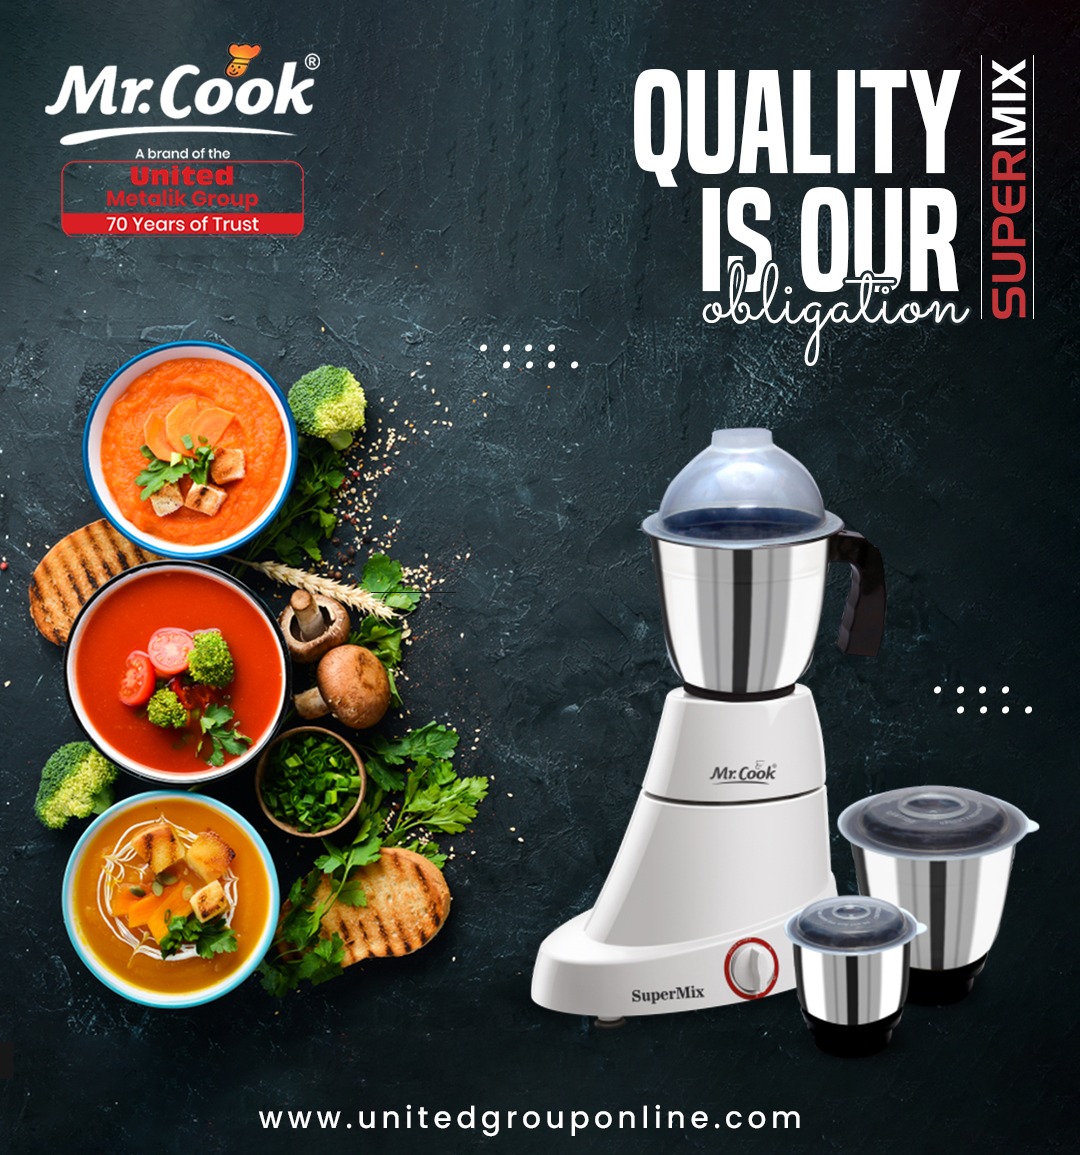 Quality is our OBLIGATION. 
. 
. 
.
 #United #Cookers #Cookware #PressureCookers #HealthyCooking #Deep #roundedkadai #RoundedTawa #Wok #Stwe #Pot #StainlessSteel #Durable #Reliable #PremiumQuality #Tastyfood #Chefchoice #Qualityproduct #Customersatisfaction #bestproductsever